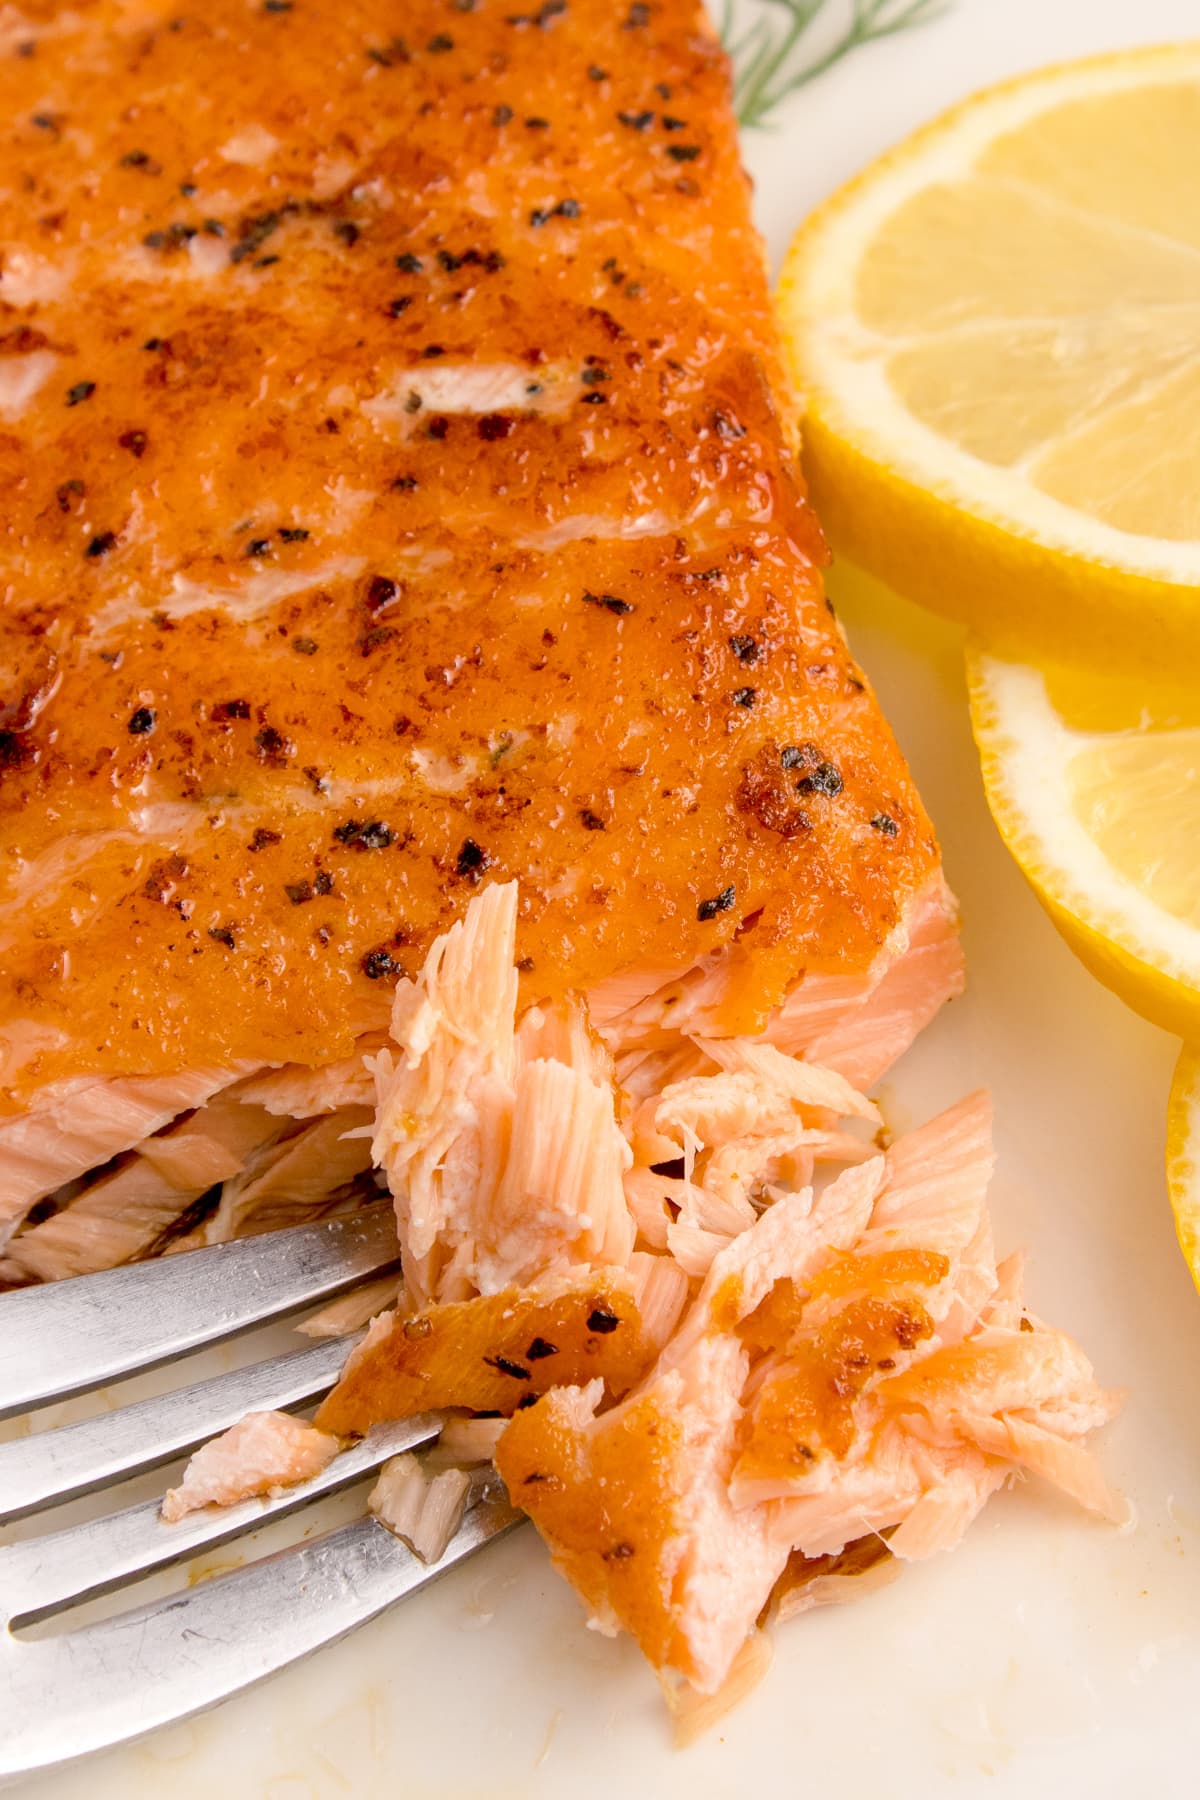 Sous Vide Salmon flaked with fork and slices of lemon on plate